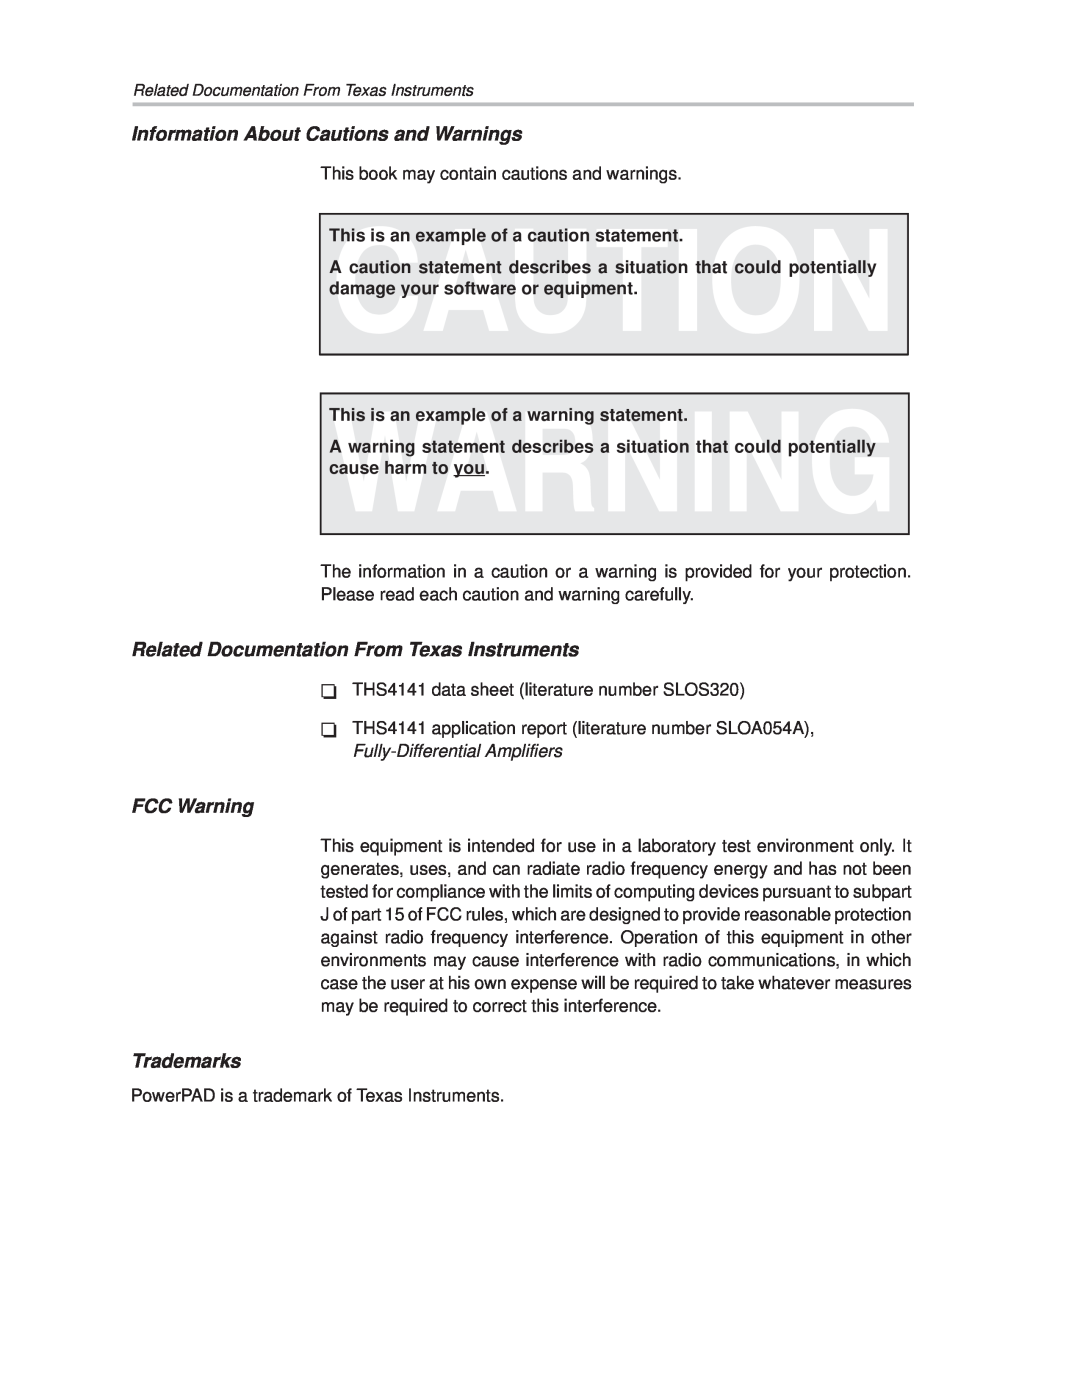 Texas Instruments THS4141 manual Information About Cautions and Warnings, Related Documentation From Texas Instruments 